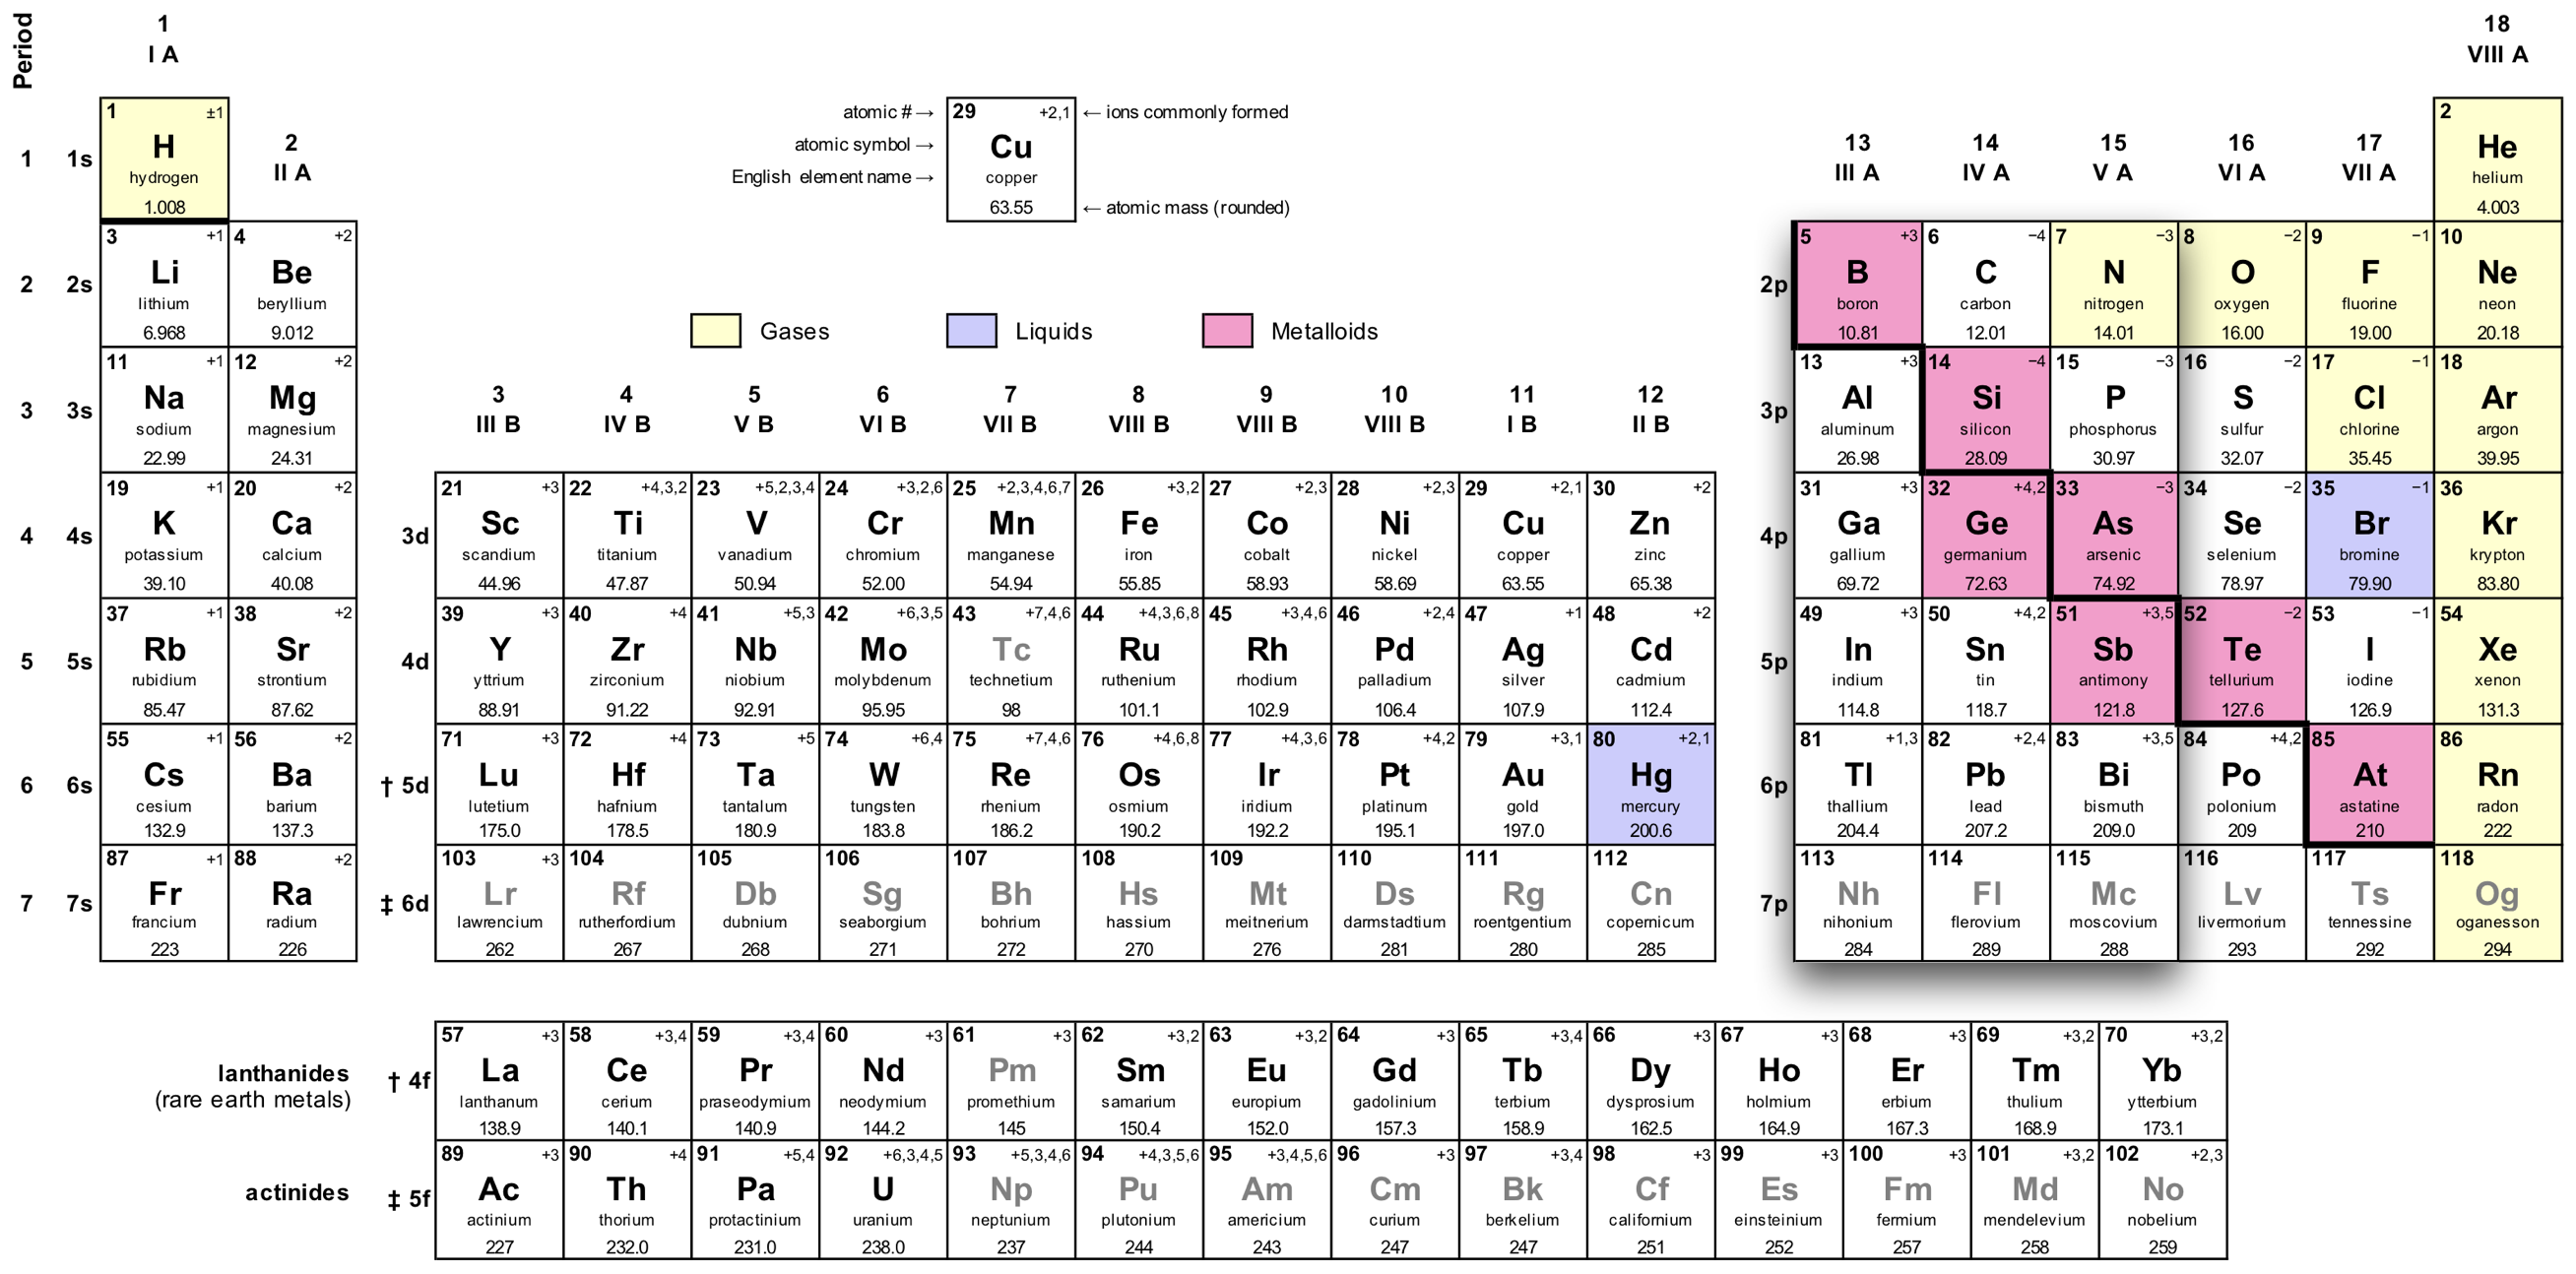 The boron, carbon, and nitrogen groups are in group 13, 14, and 15.